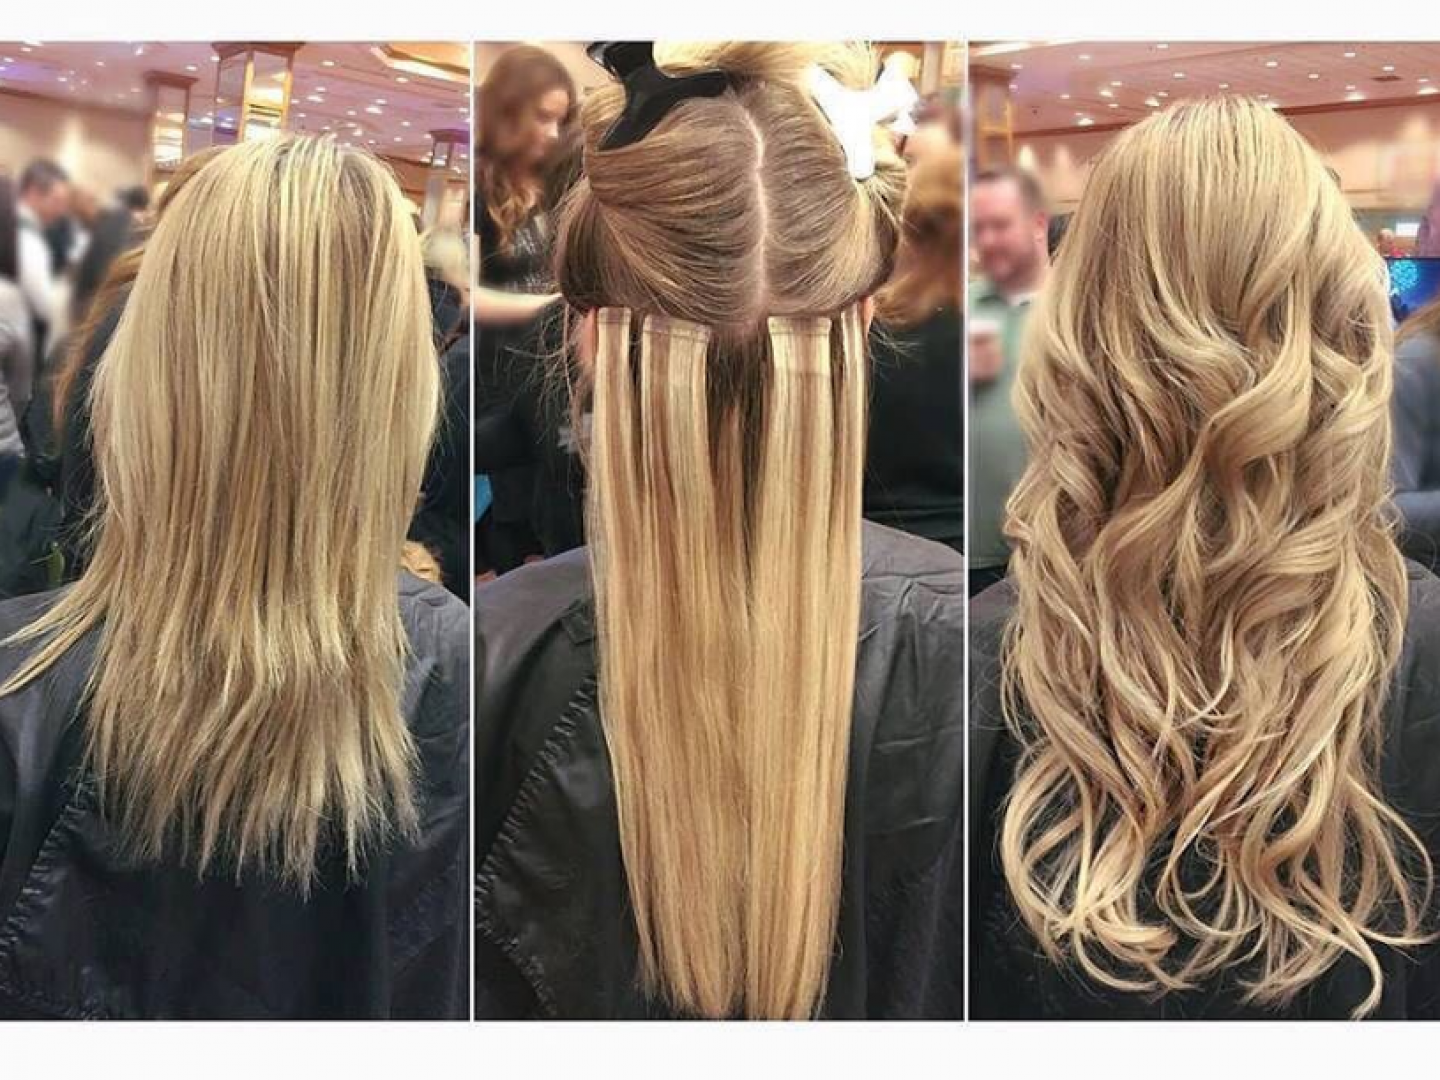 1. Babe Hair Extensions - Blondes - wide 3